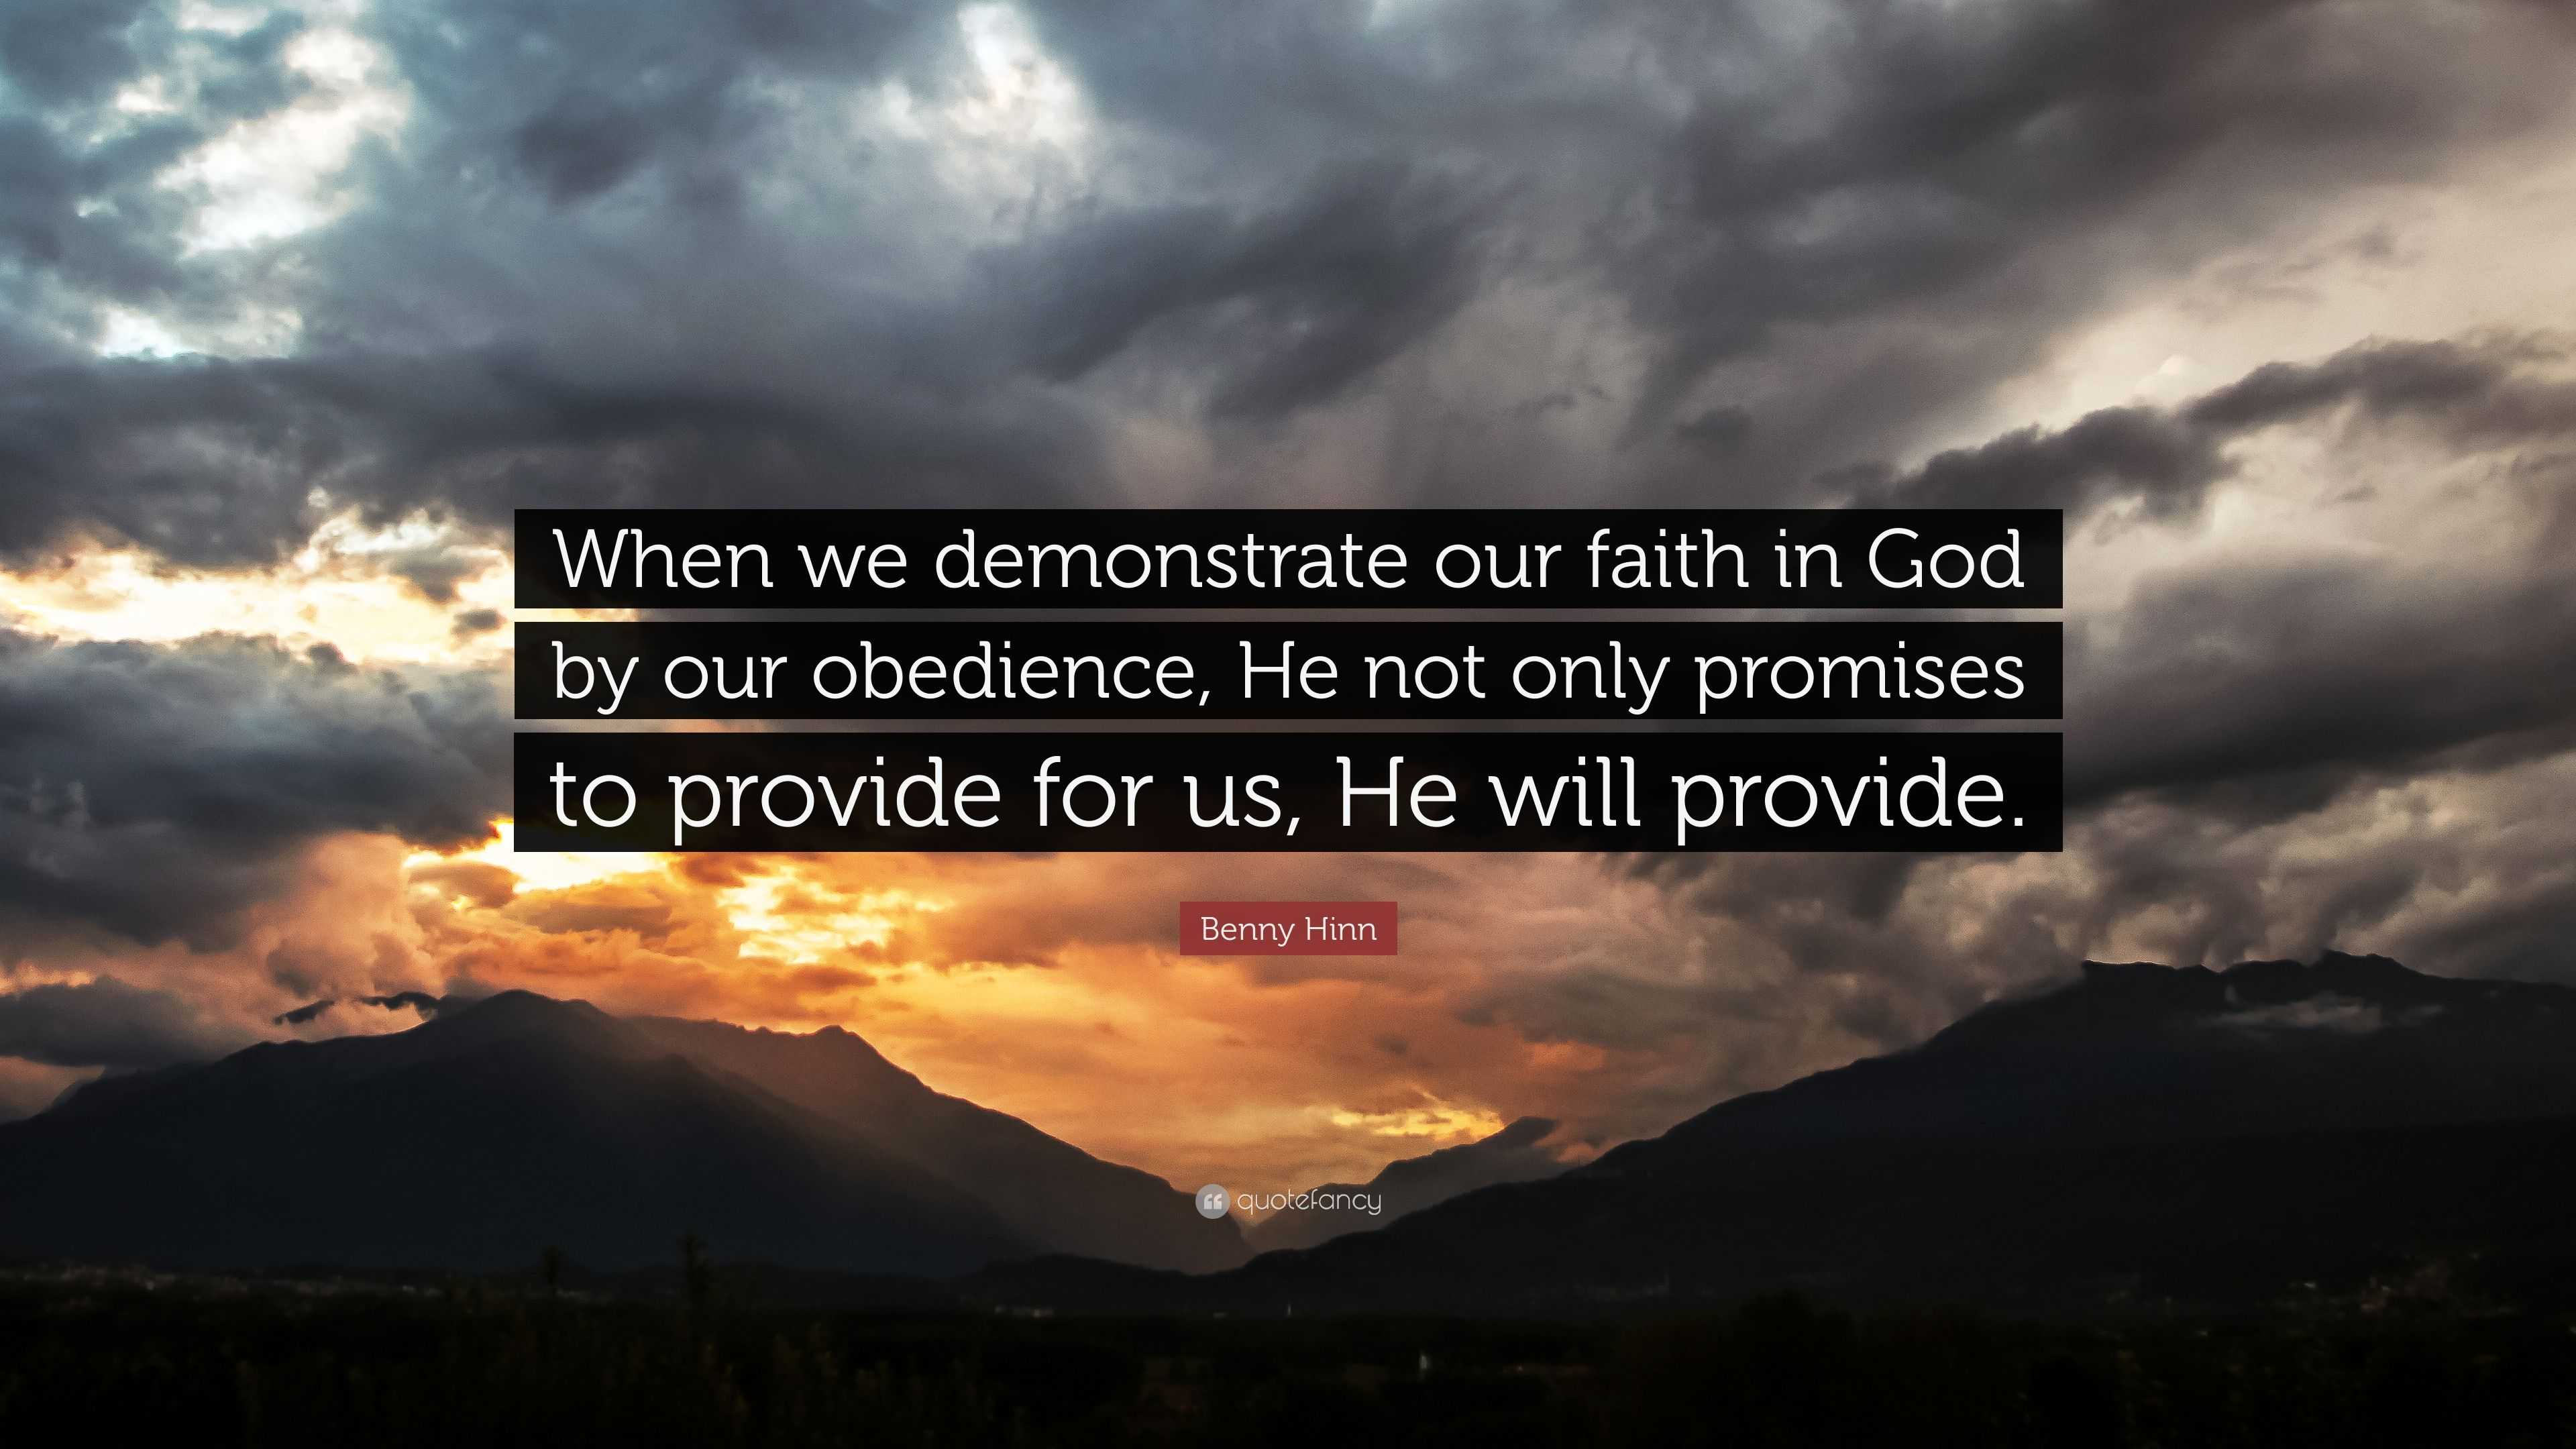 Benny Hinn Quote: “When we demonstrate our faith in God by our obedience,  He not only